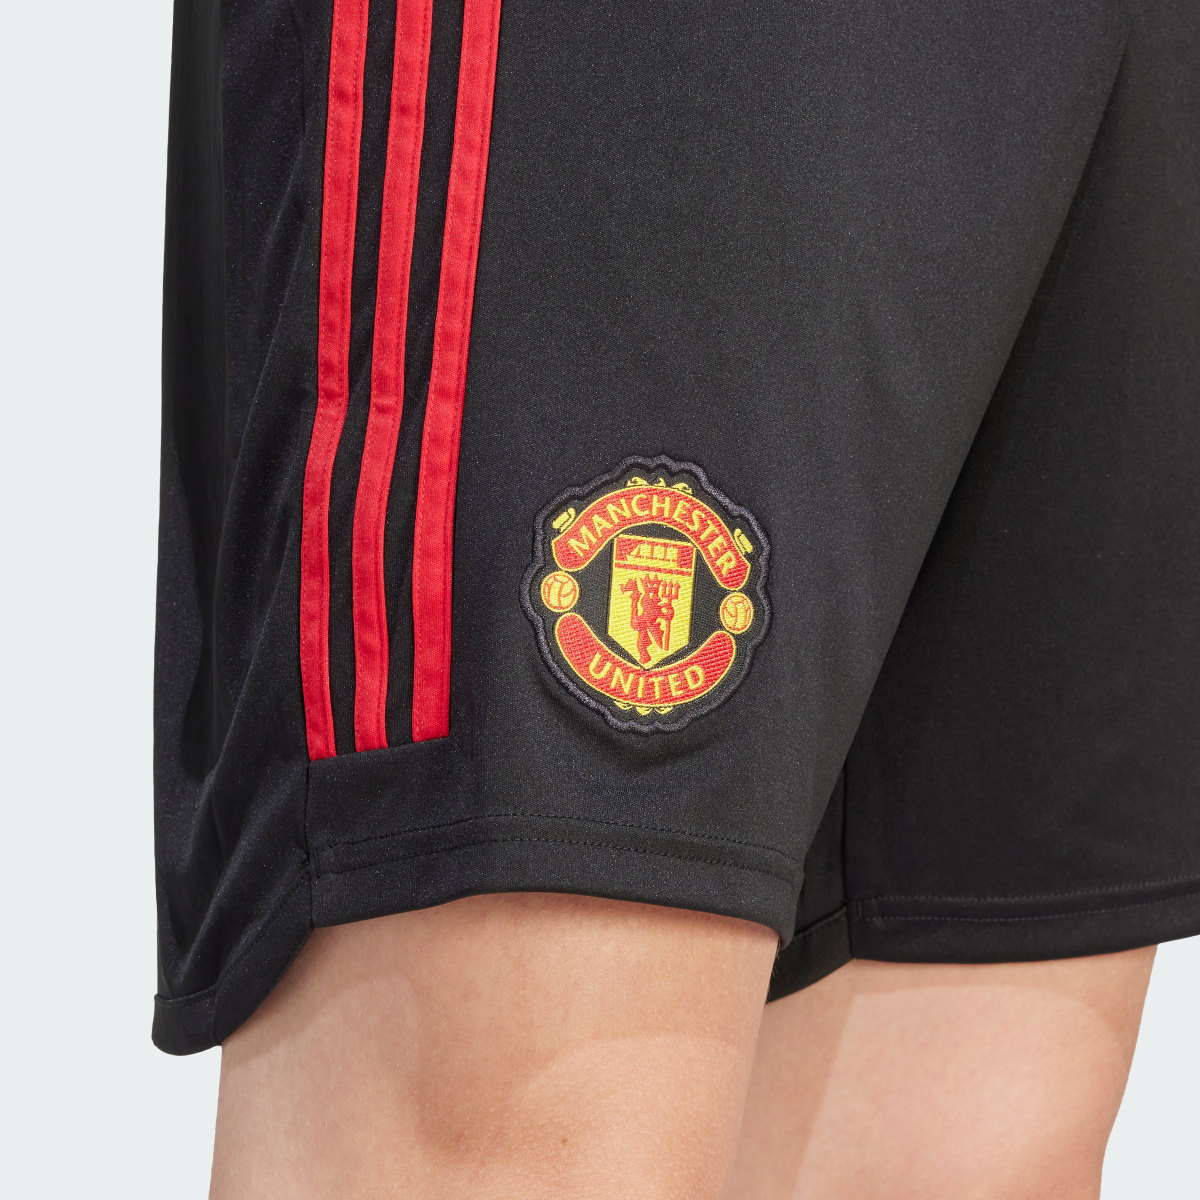 Adidas Short Home 23/24 Manchester United FC. 6